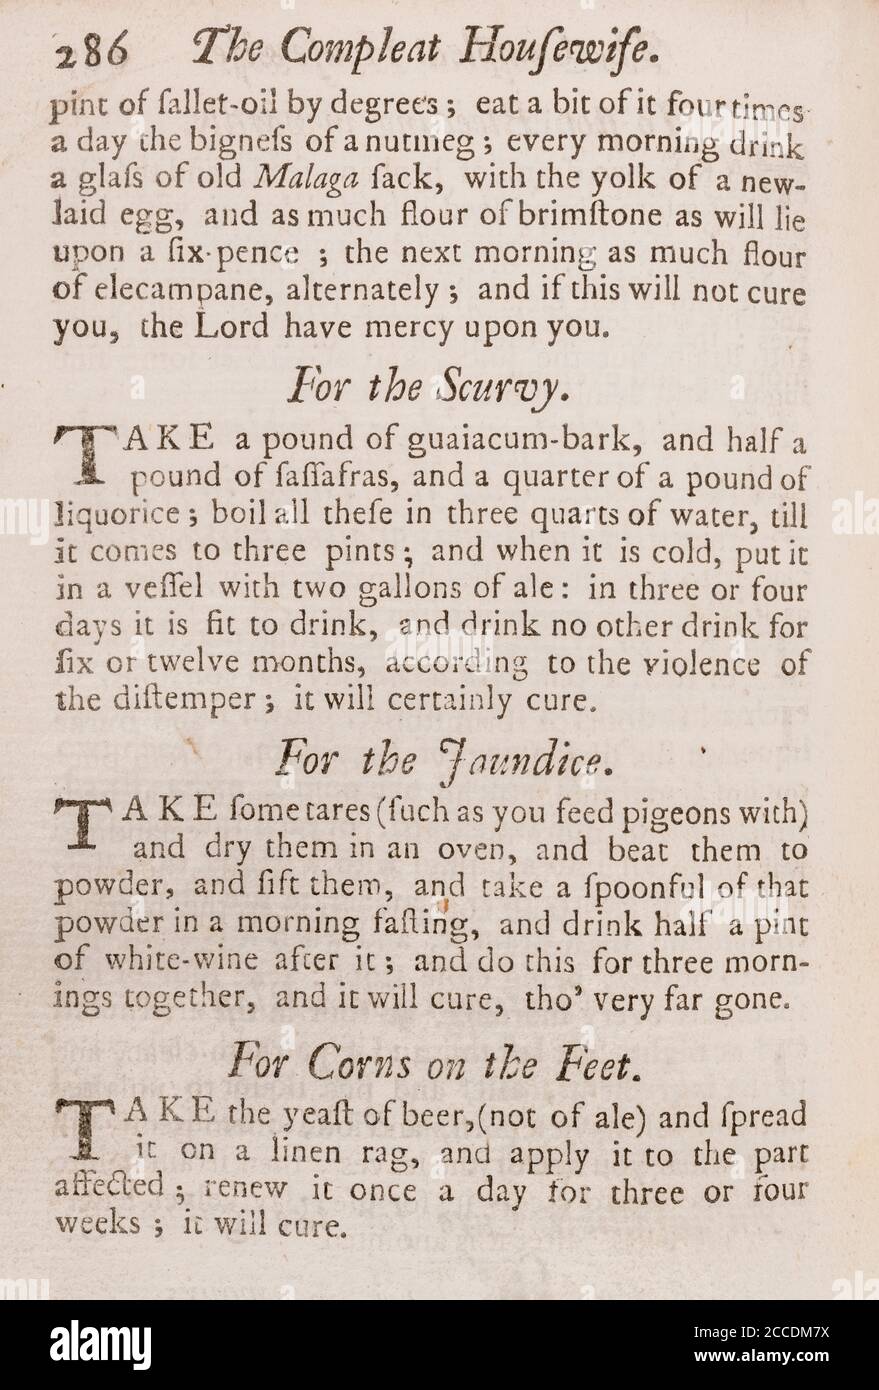 Covid Lockdown has seen re-emergence of Scurvy cases through vitamin deficient diet. 18th century recipe for scurvy remedy. See Add. Notes for more Stock Photo